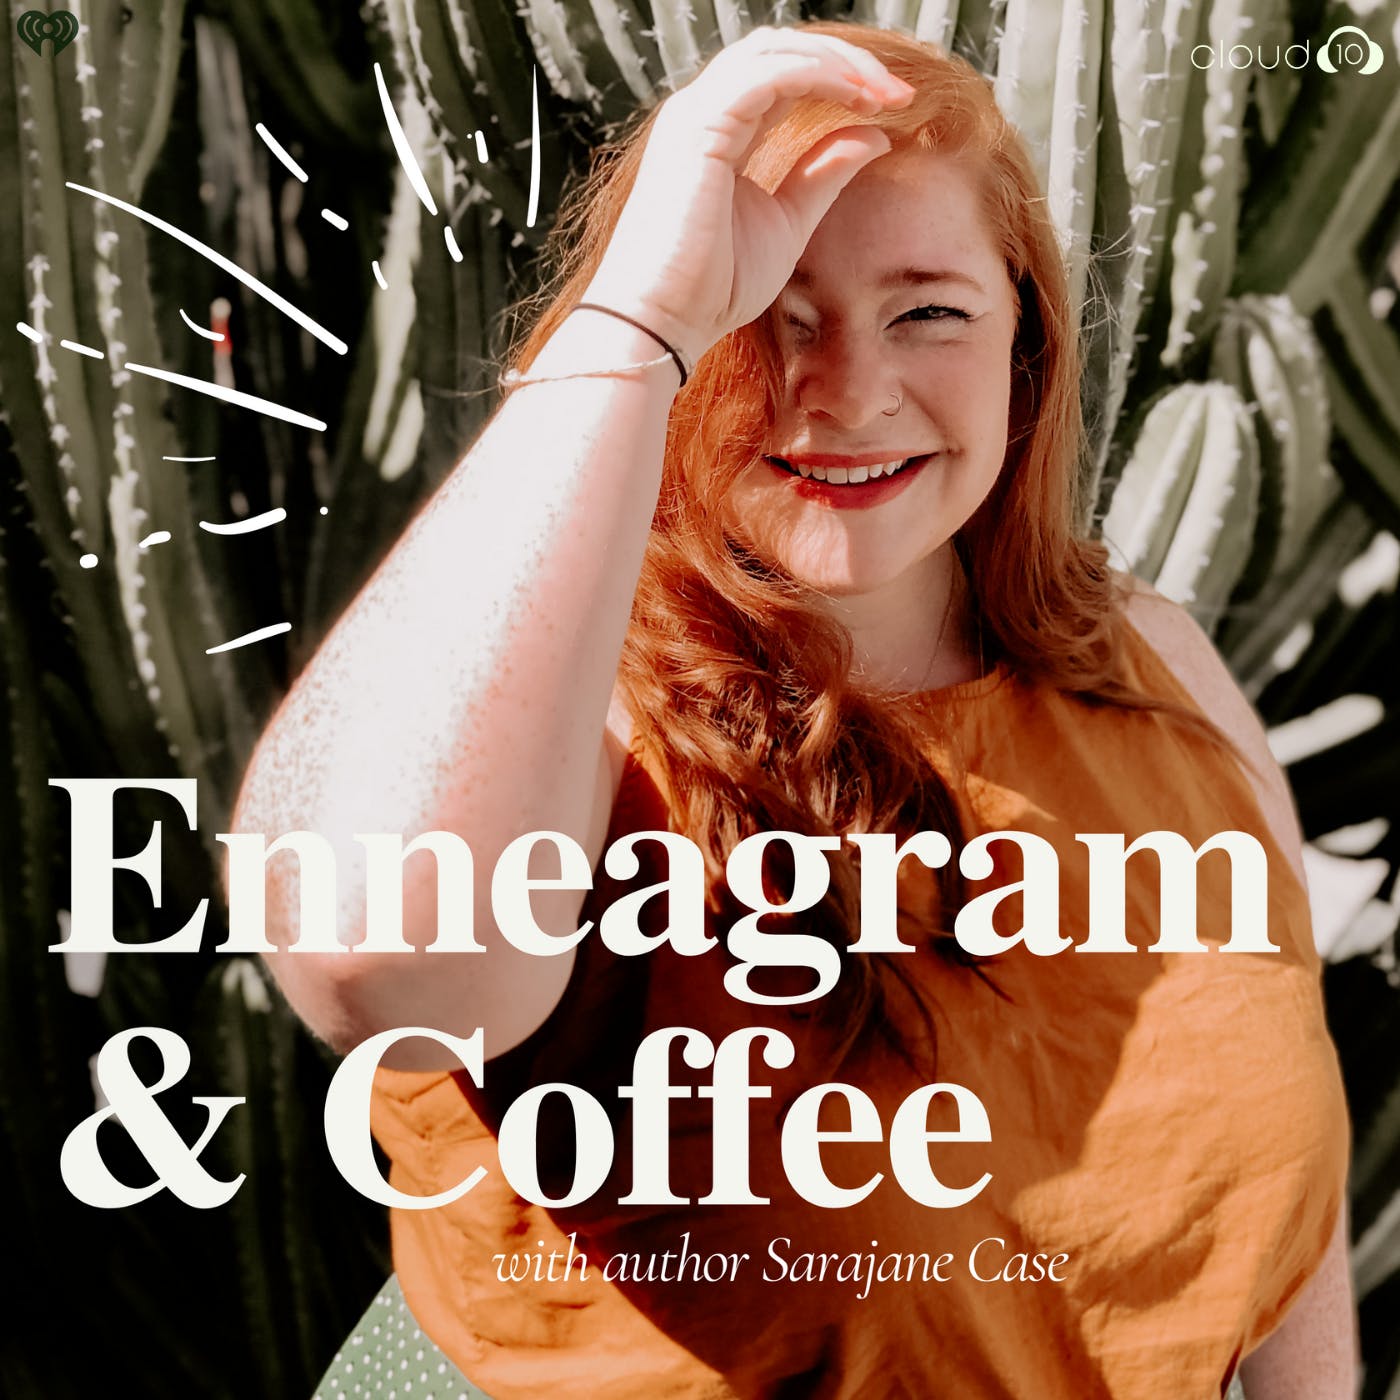 Introduction to the Enneagram & Parenting.